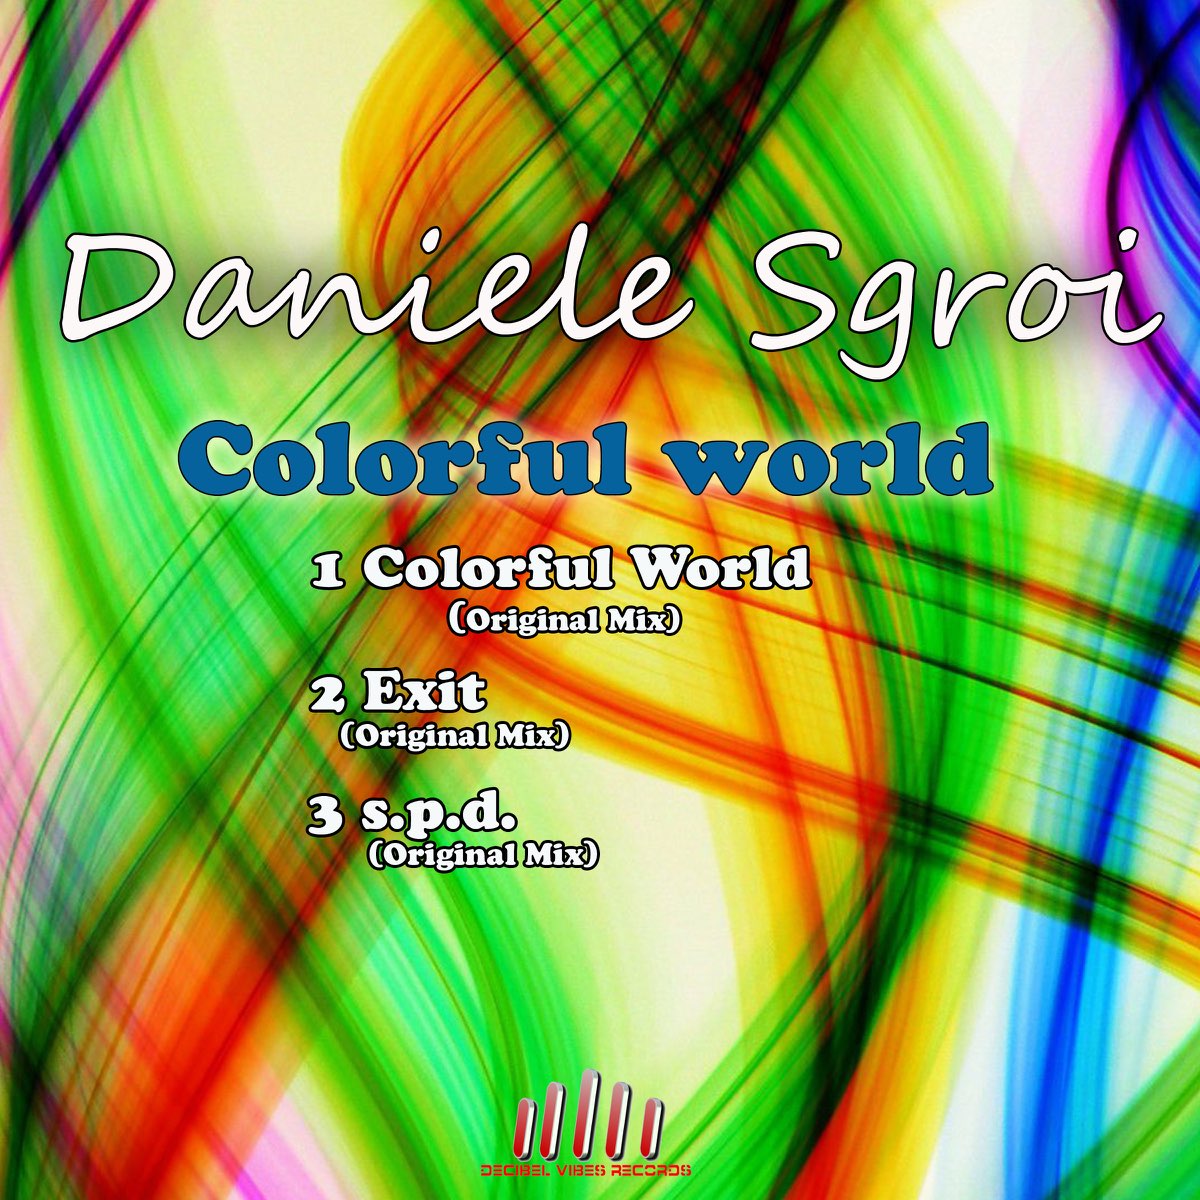 World is colours. Colorful World. Colour the World. World of Colors.